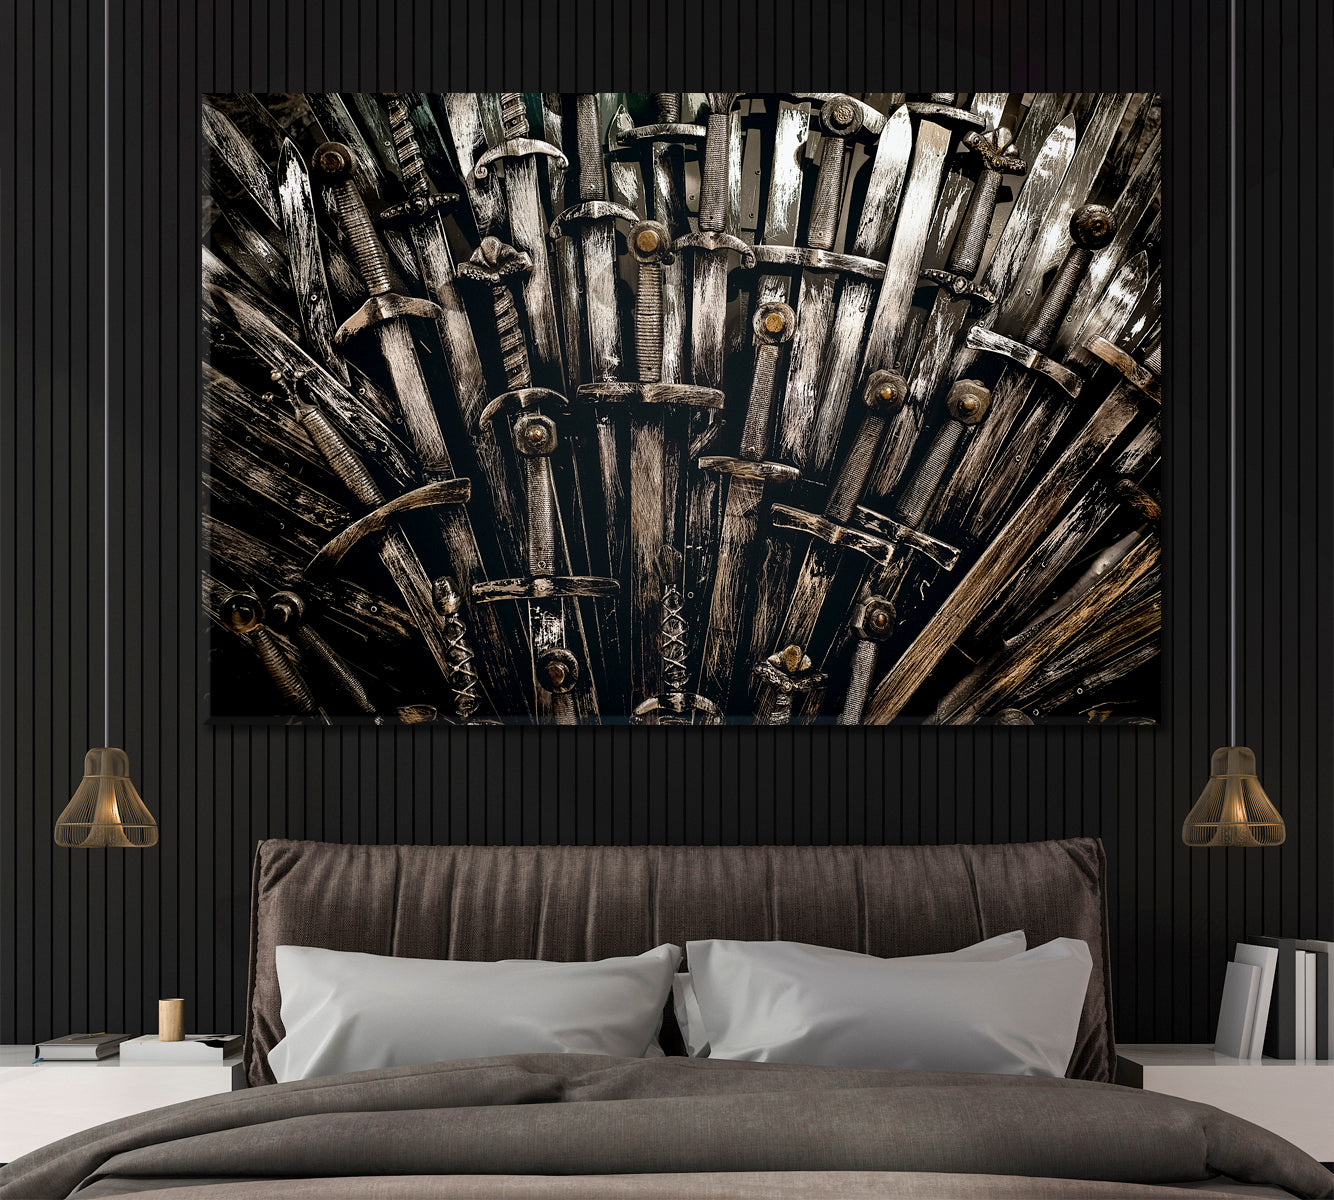 Knight Swords Canvas Print ArtLexy 1 Panel 24"x16" inches 